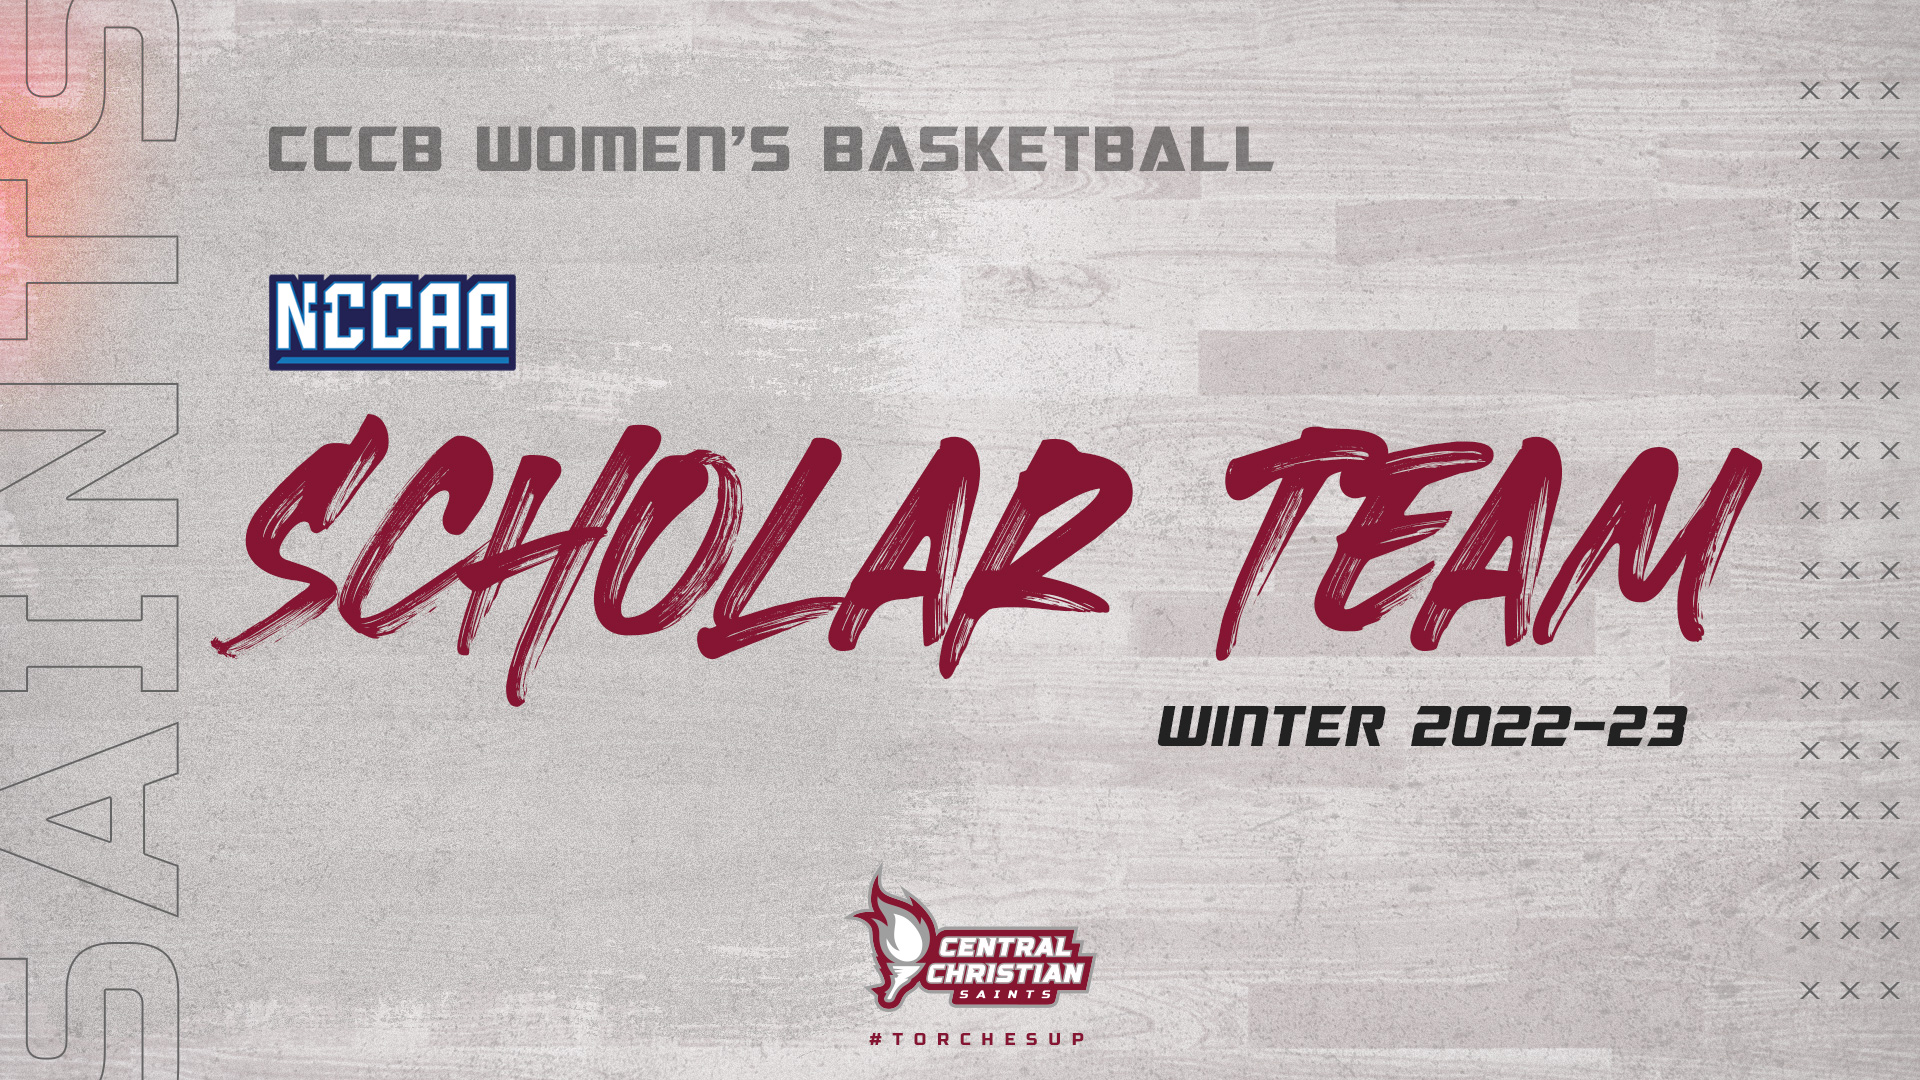 The 2022-23 CCCB Women's Basketball Team earned the Scholar Team award for the winter/spring season with a team GPA of 3.56.